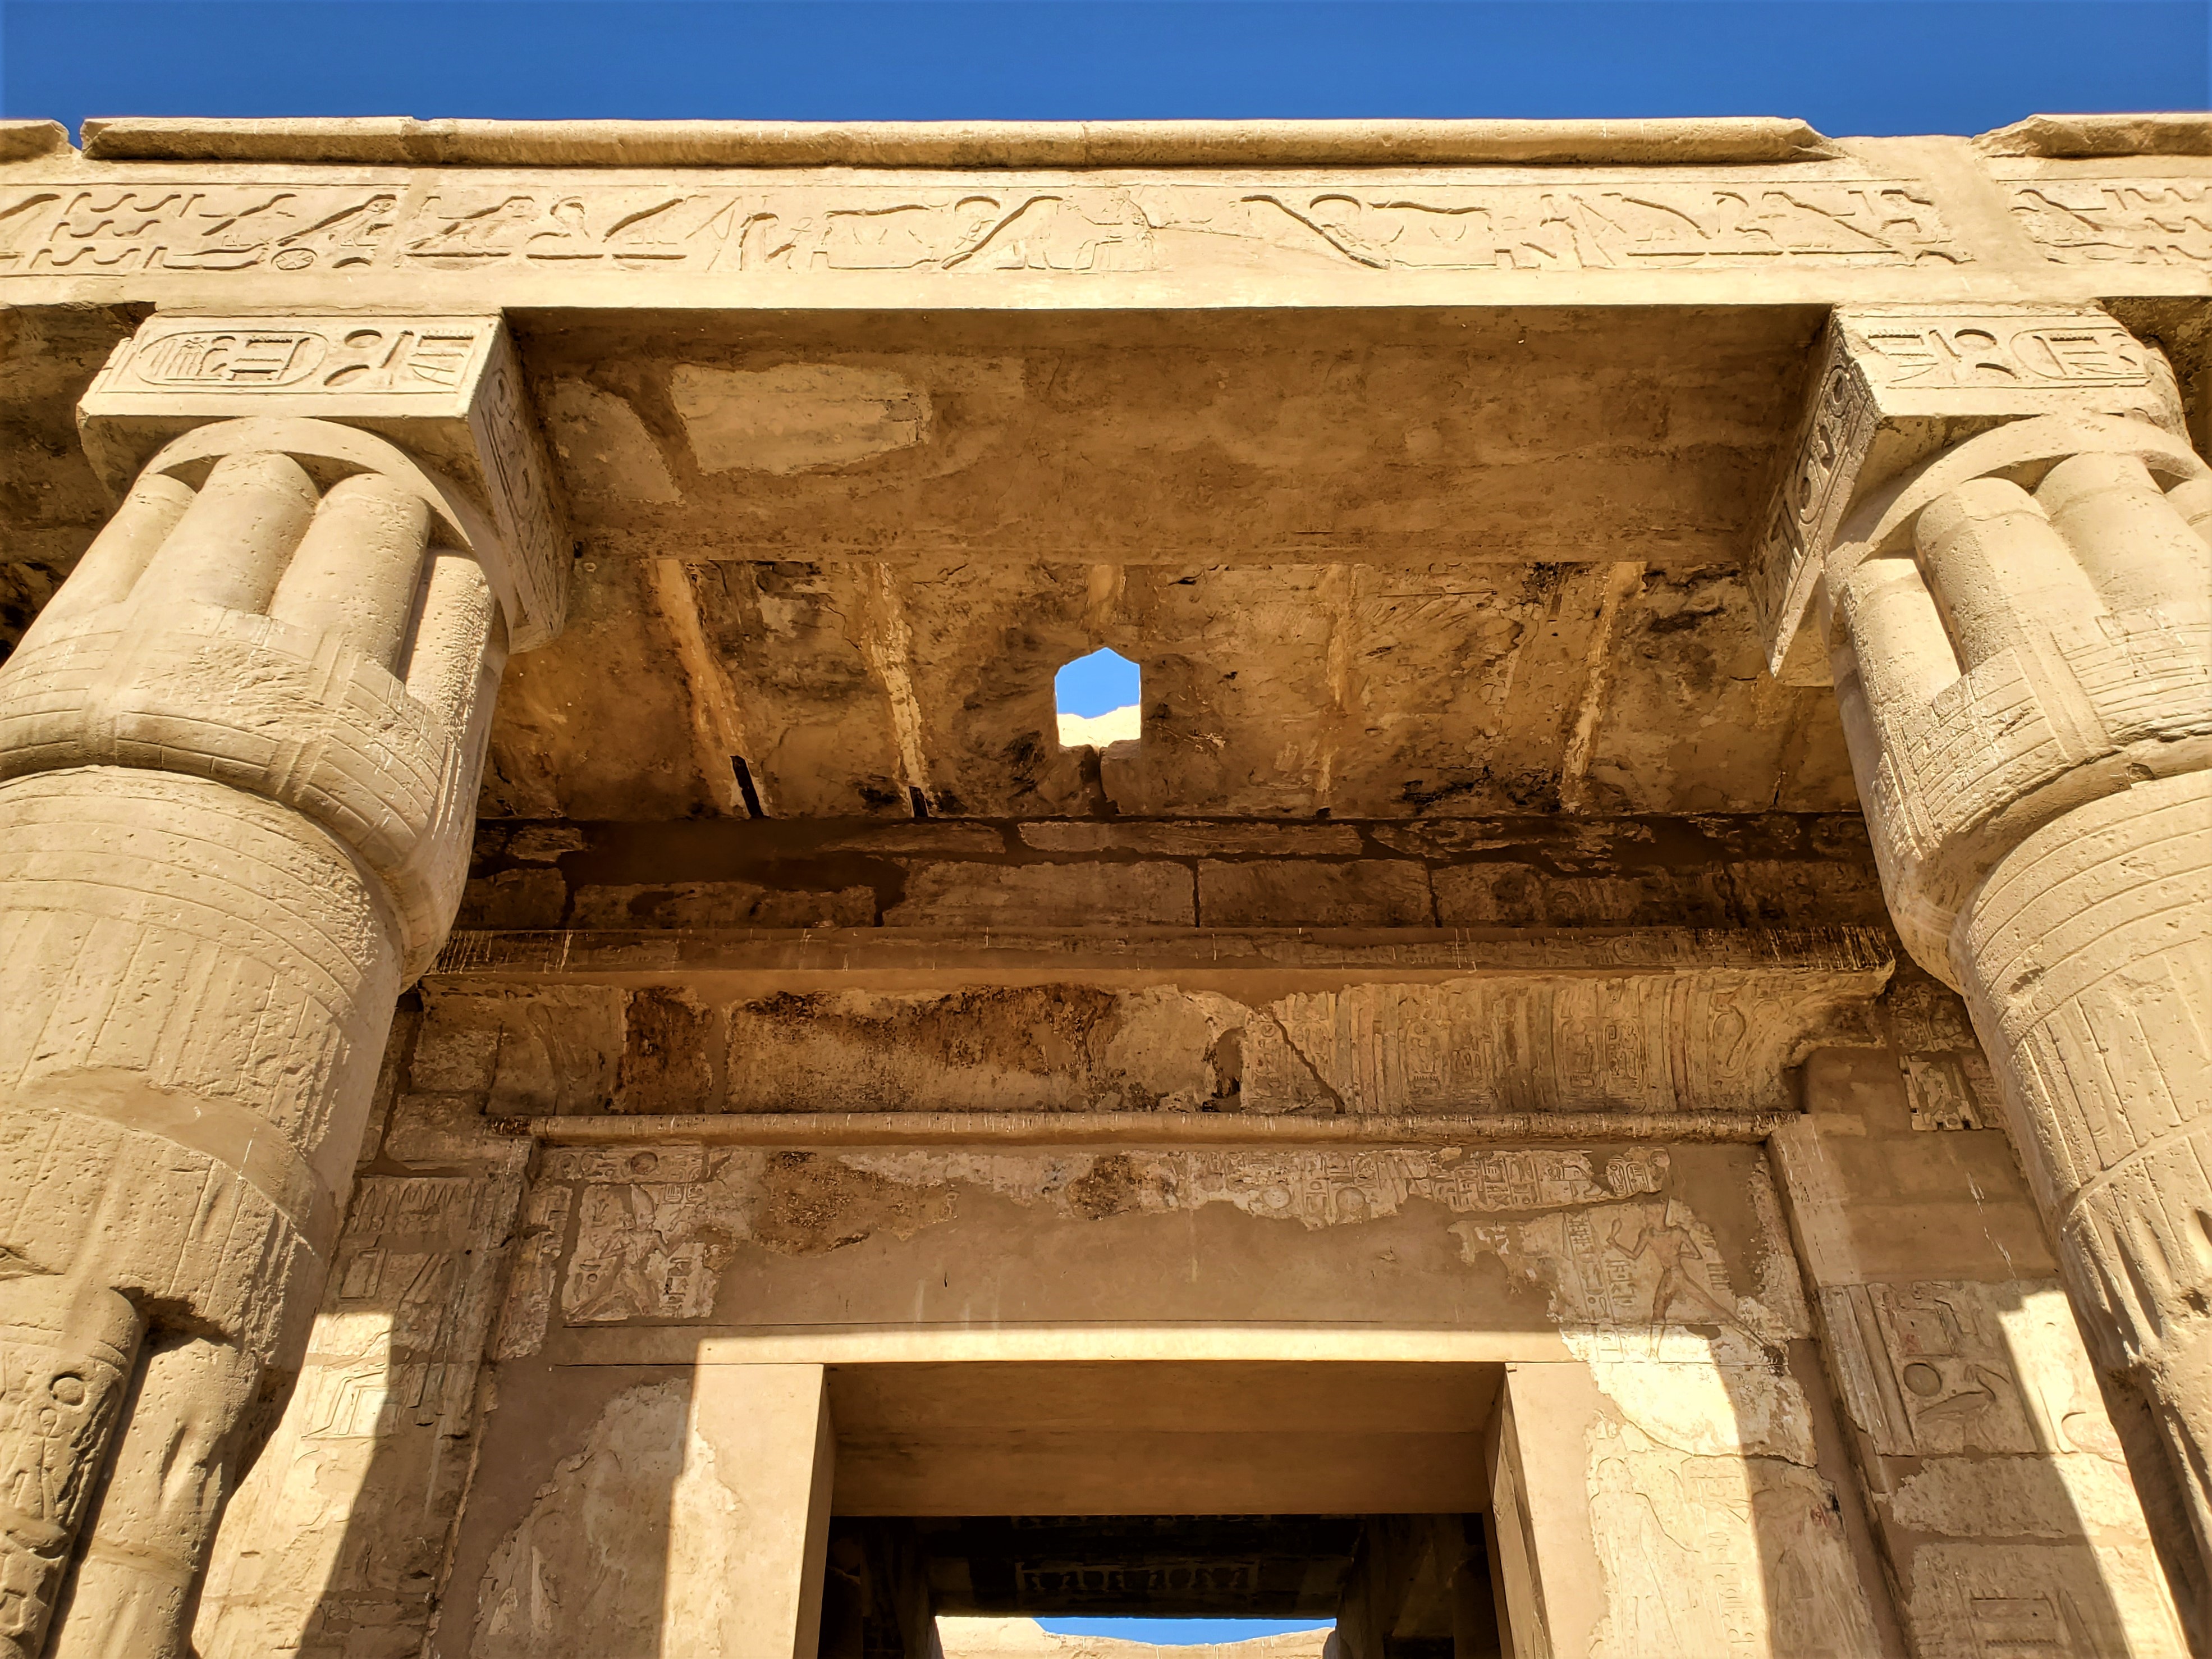 entryway of King Seti 1 mortuary temple with an interesting hole above the door.